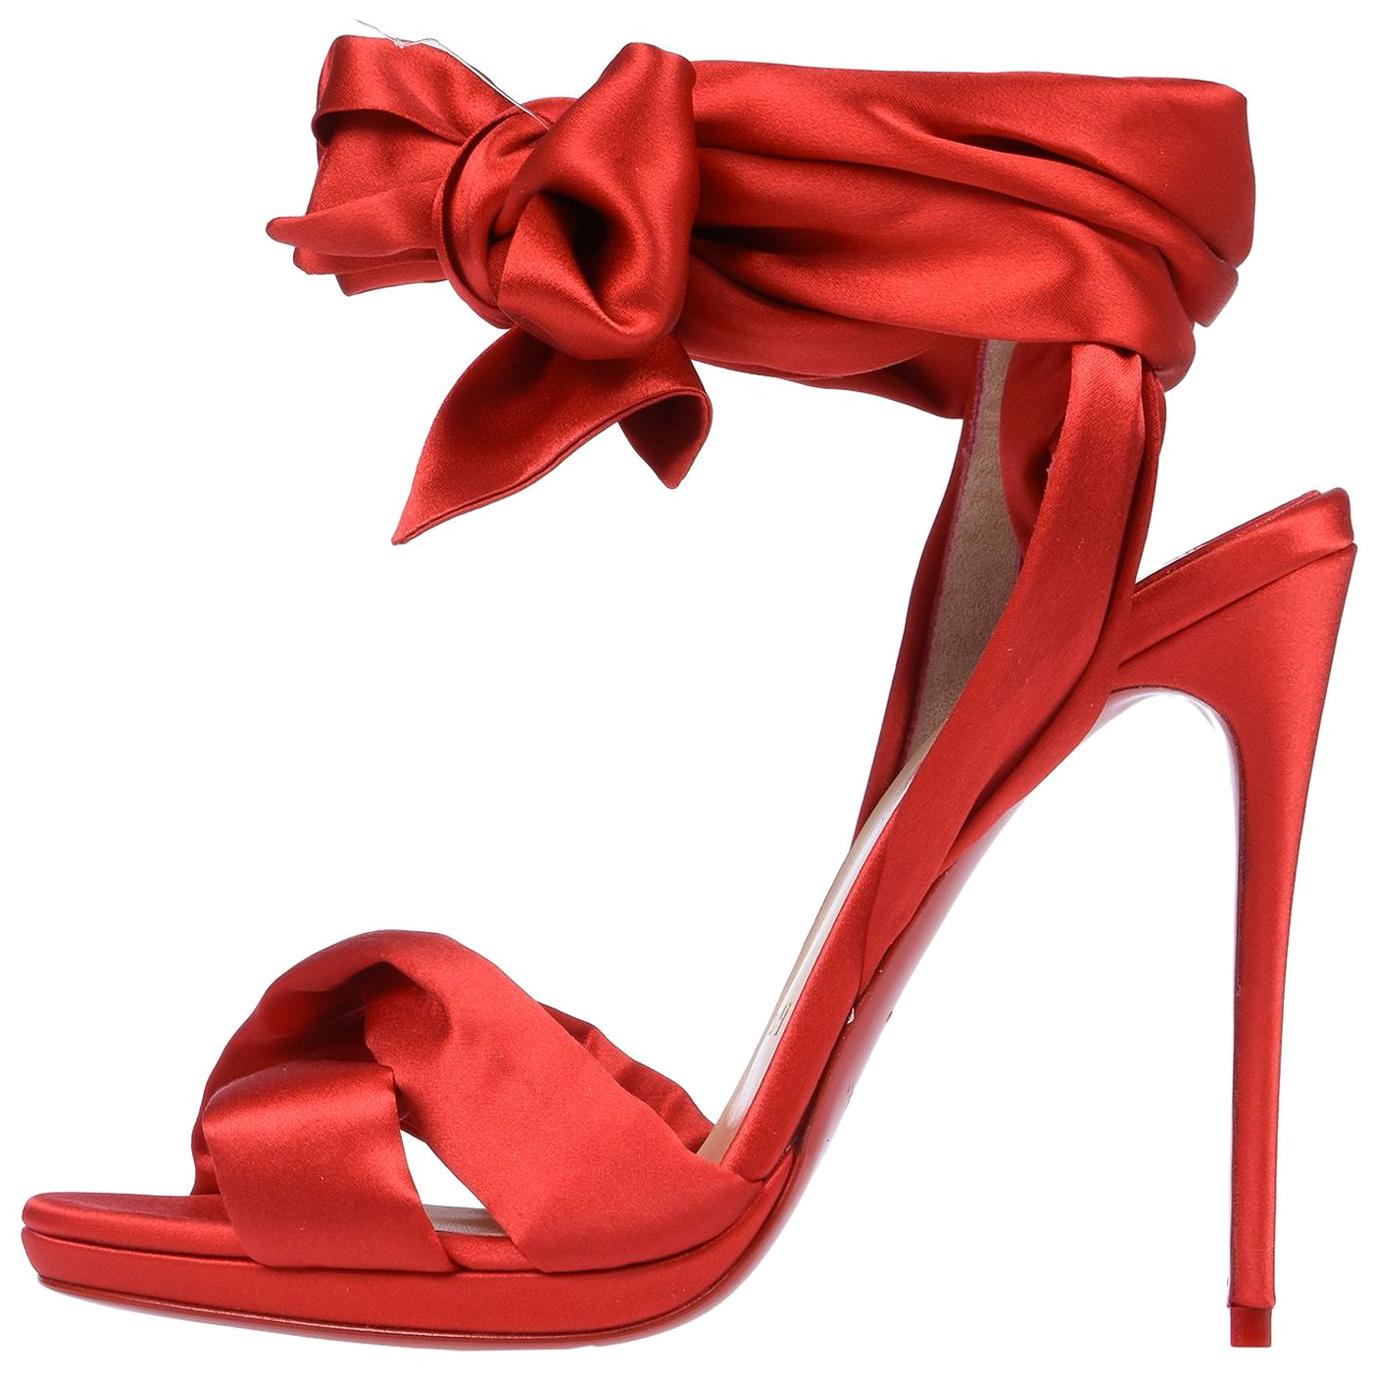 Christian Louboutin NEW Red Satin Bow Evening Sandals Pumps Heels in Box 